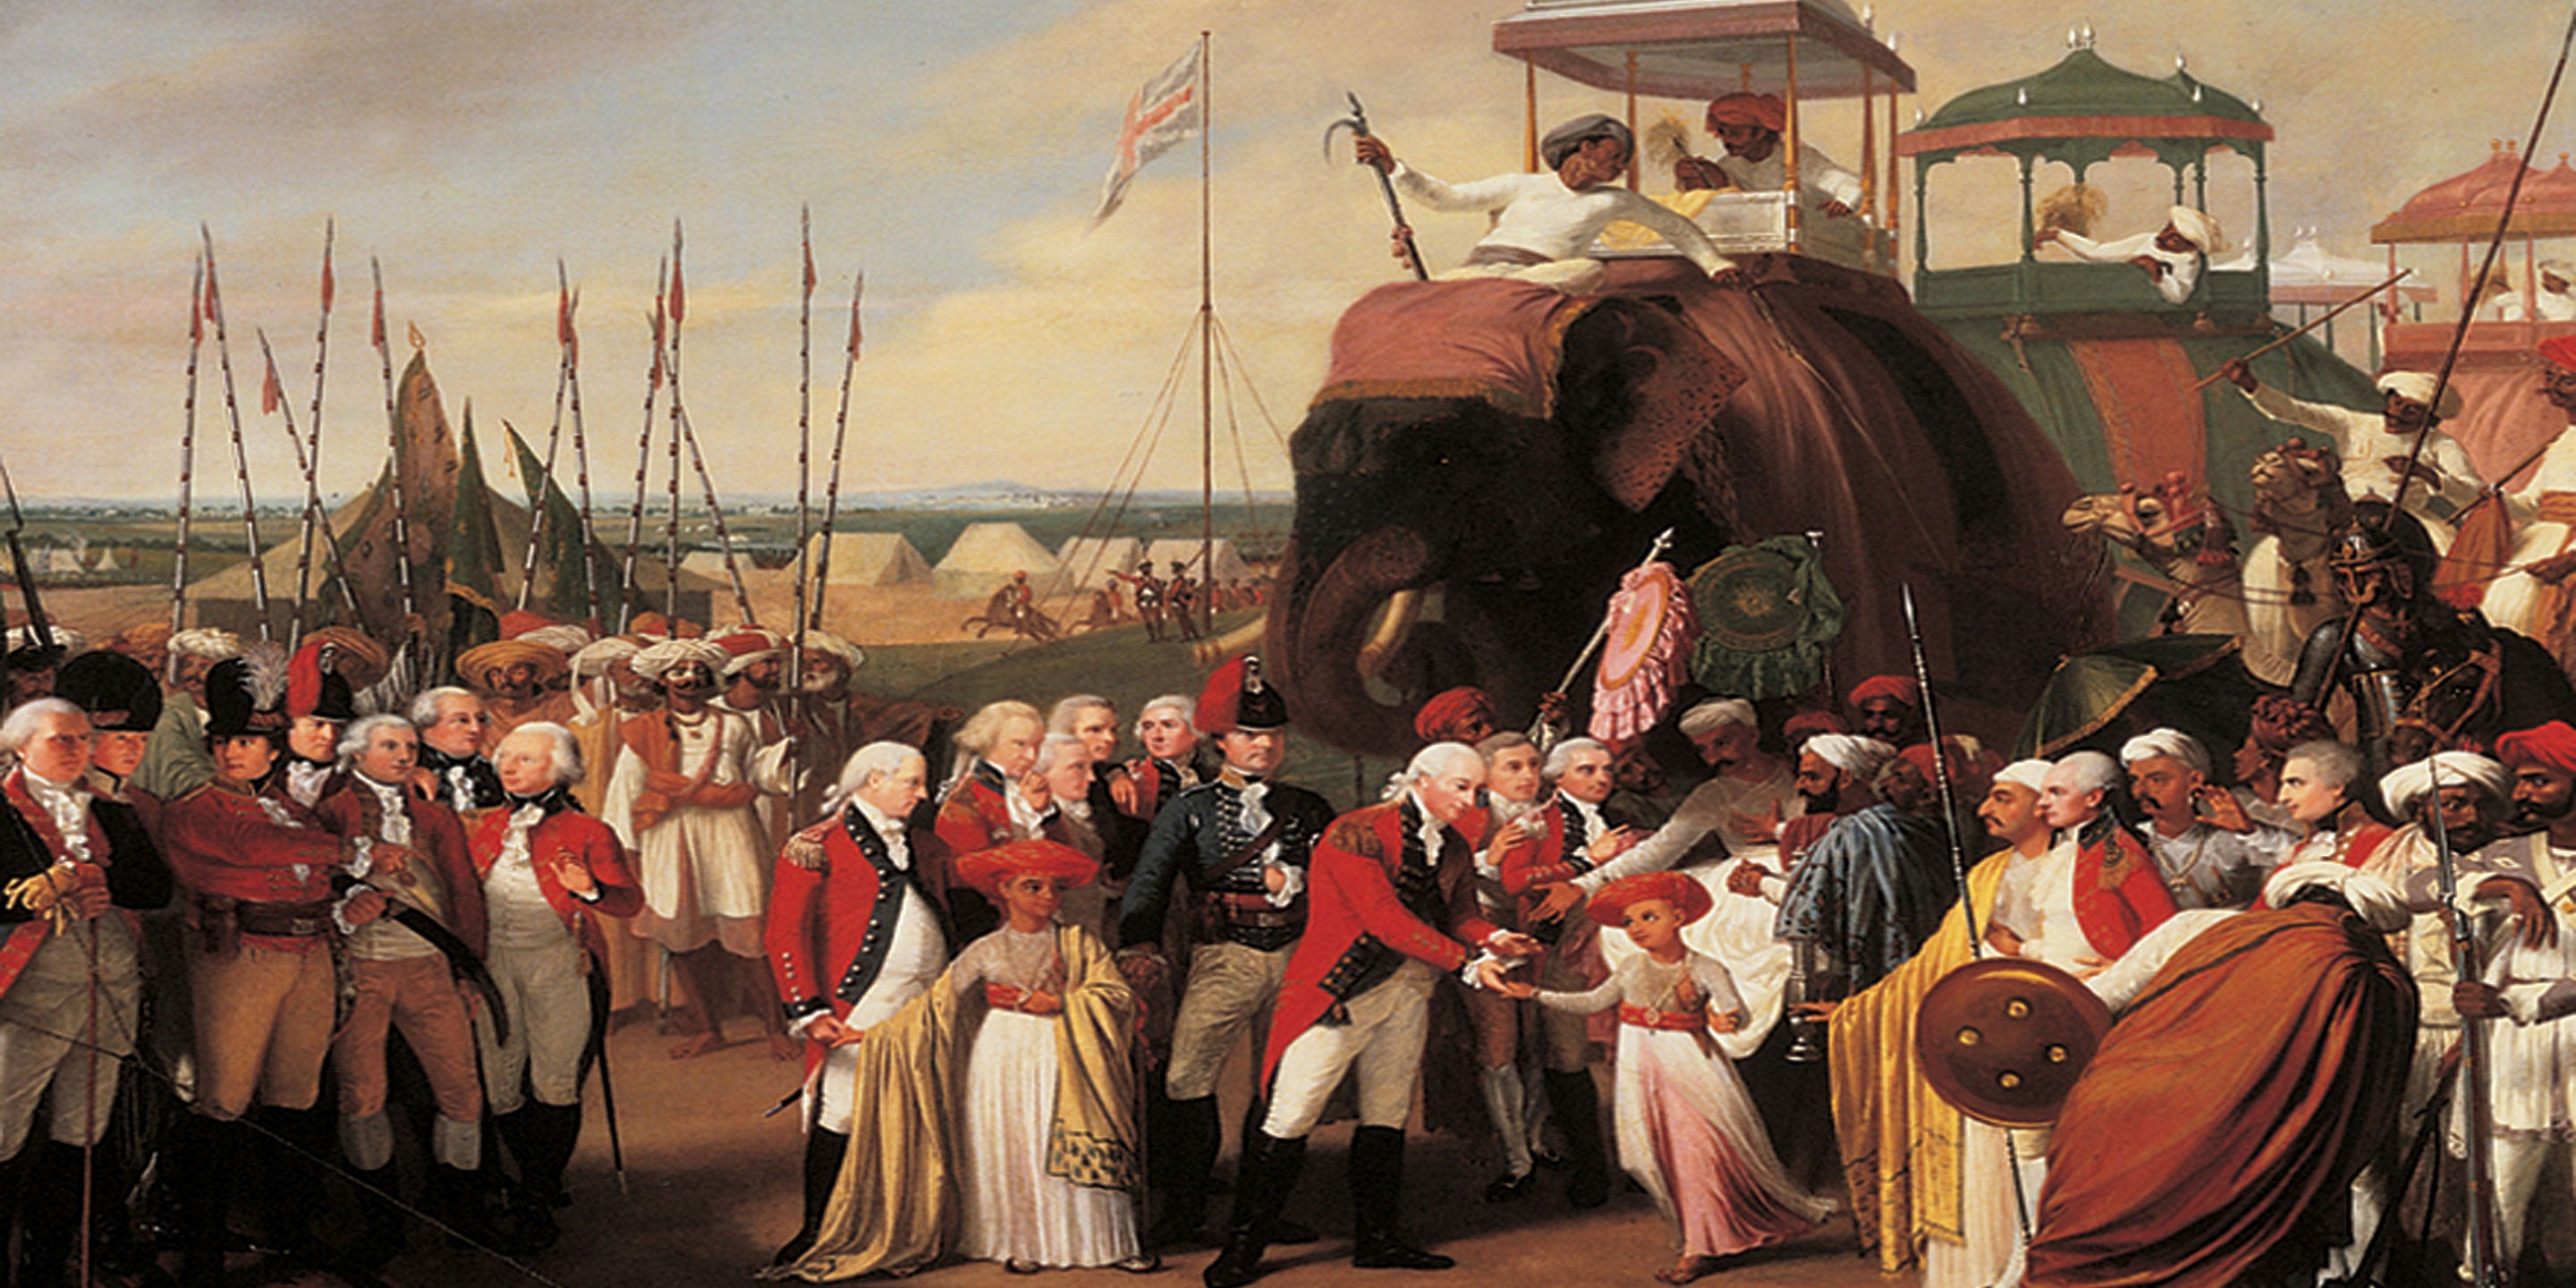 Cornwallis receives The Tiger of Mysore’s Sons